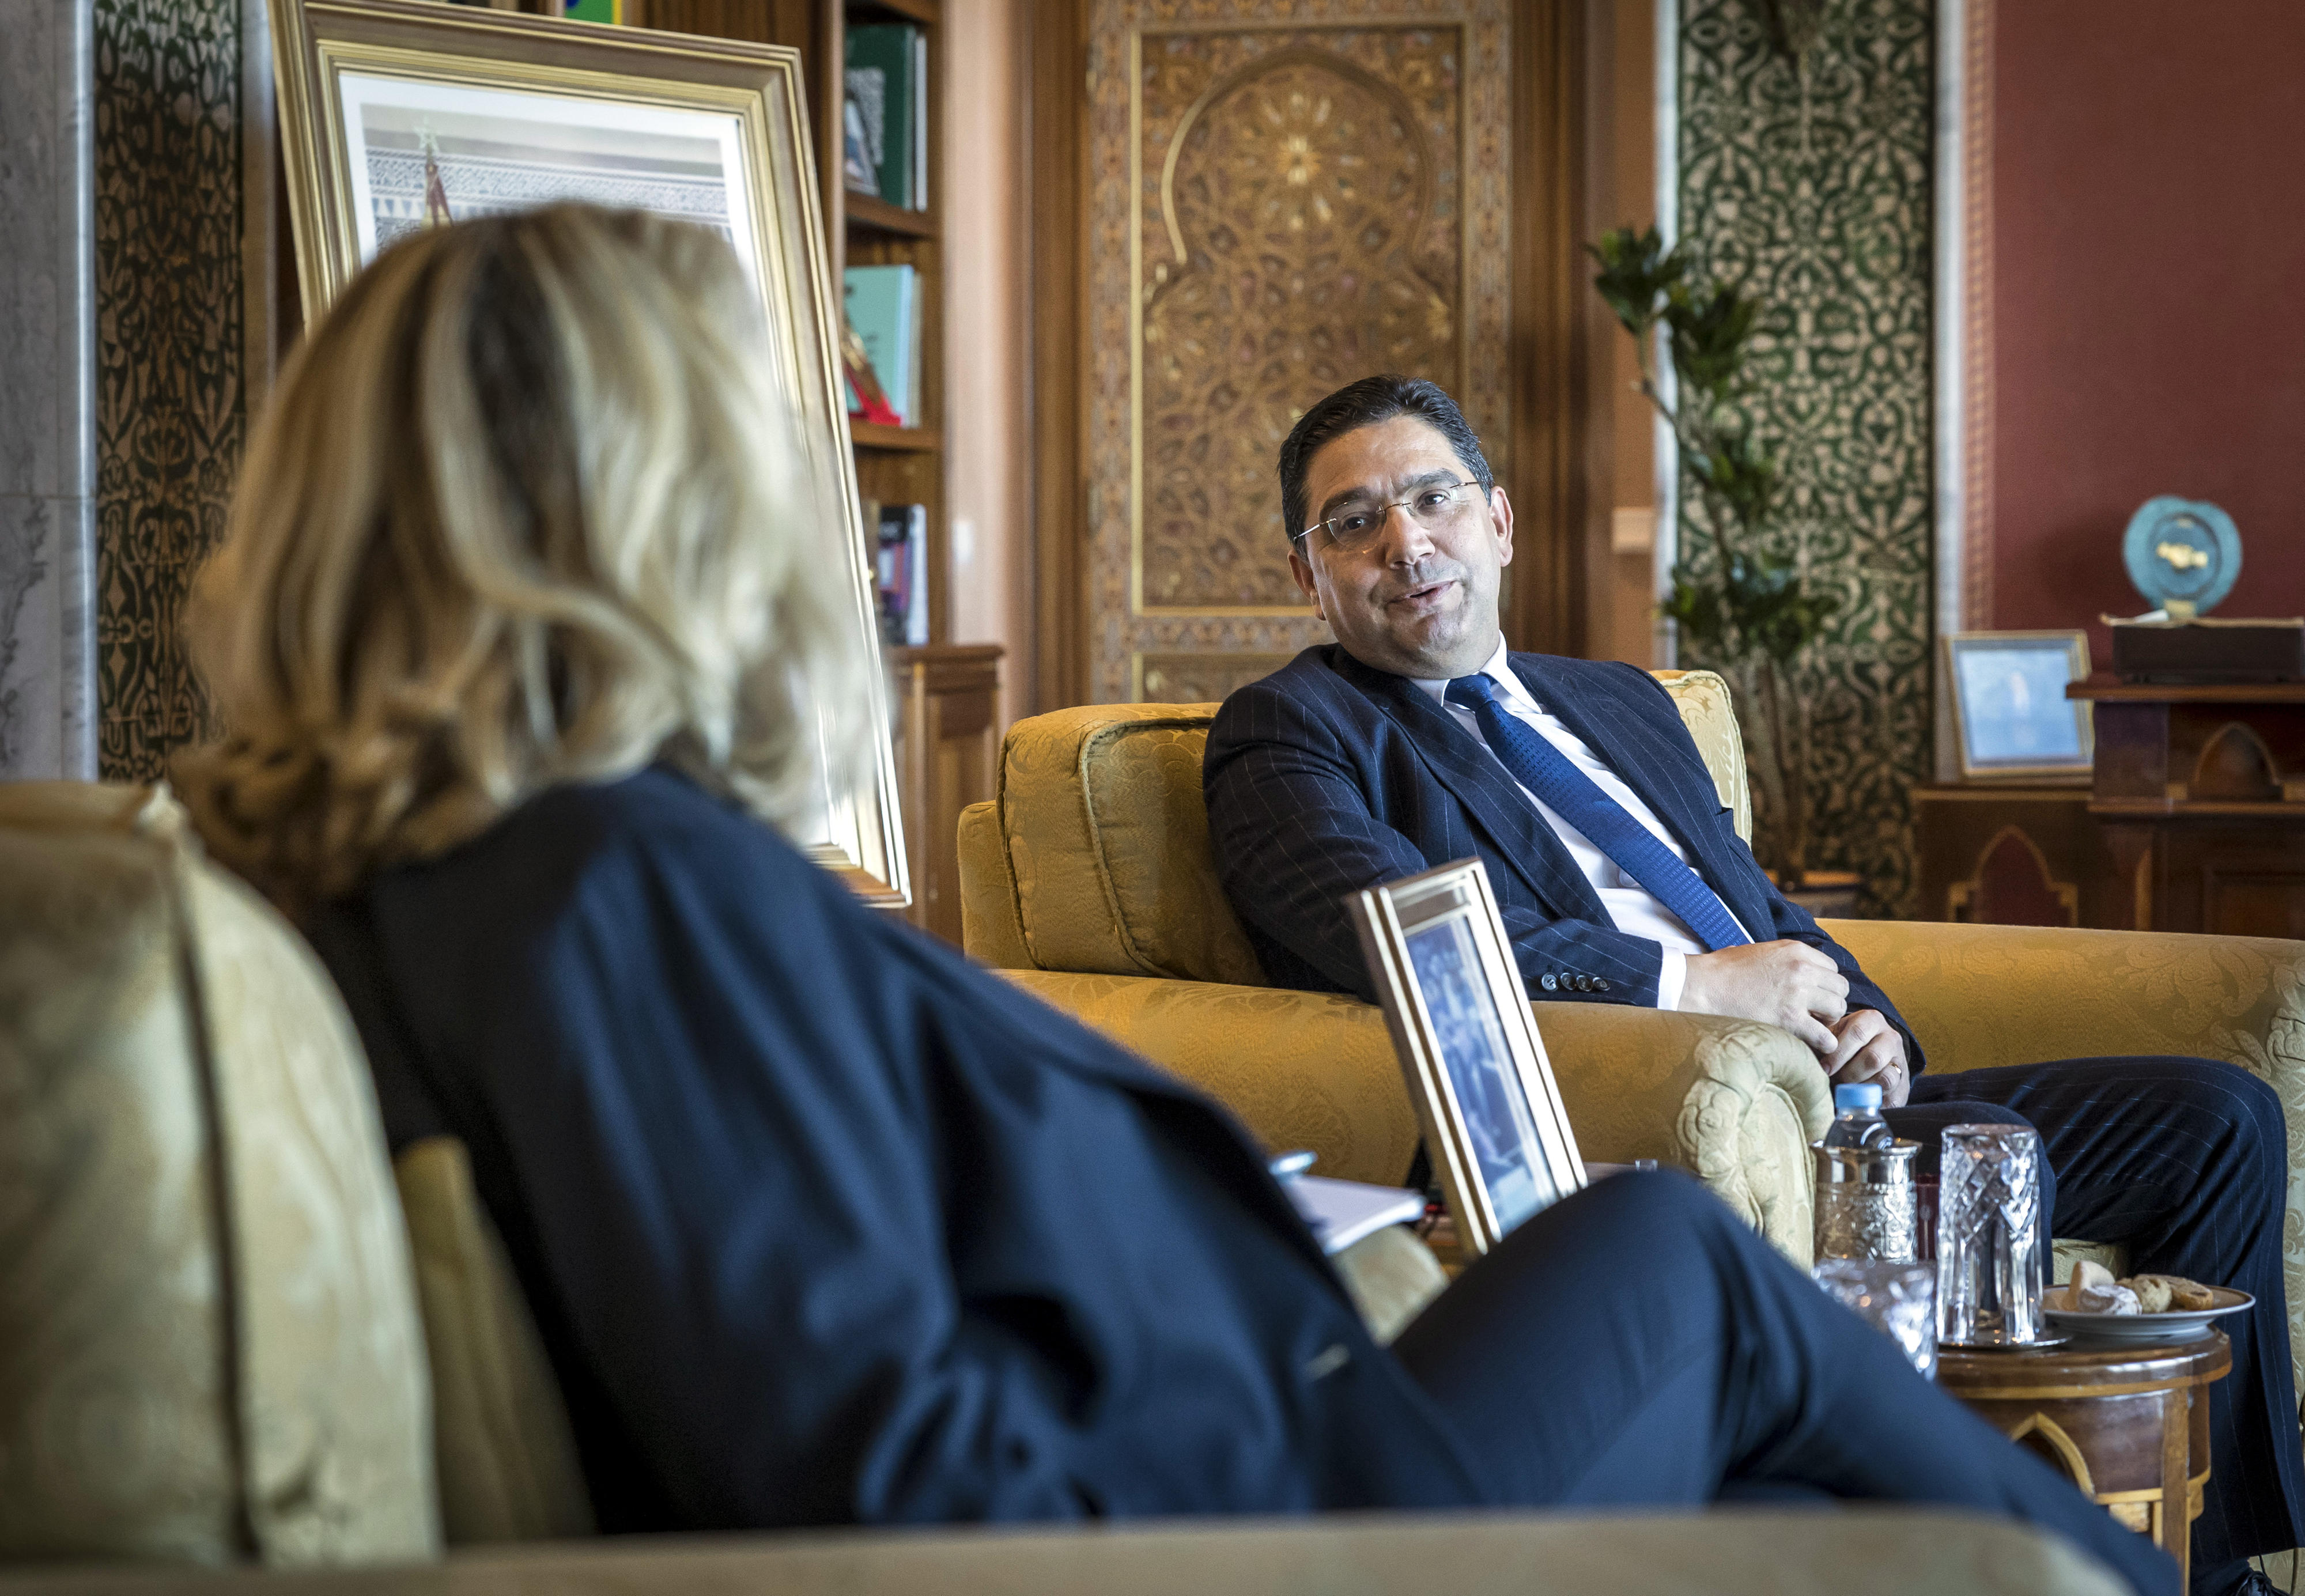 Development Minister Svenja Schulze and the Moroccan Foreign Minister Nasser Bourita at their meeting in Rabat